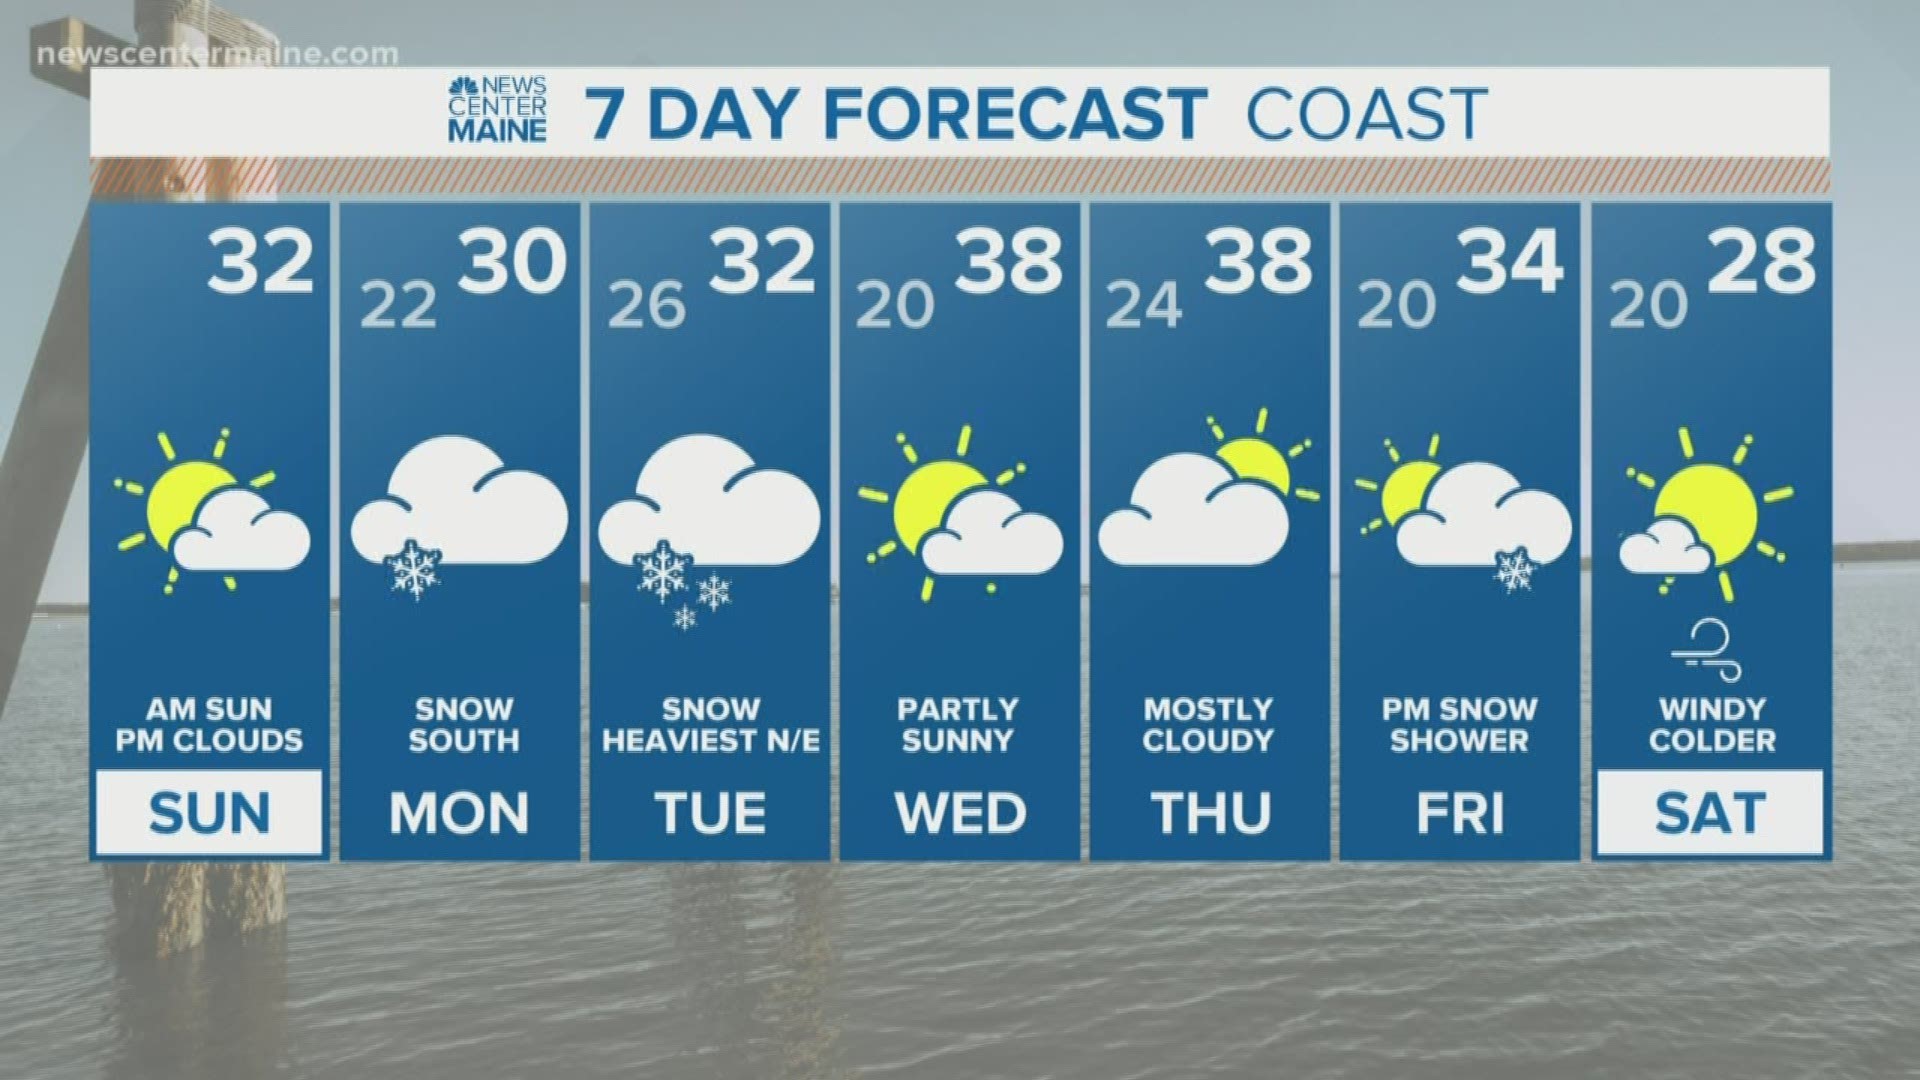 NEWS CENTER Maine Weather Video Forecast. Updated on 12/01/19 at 8:00 am.